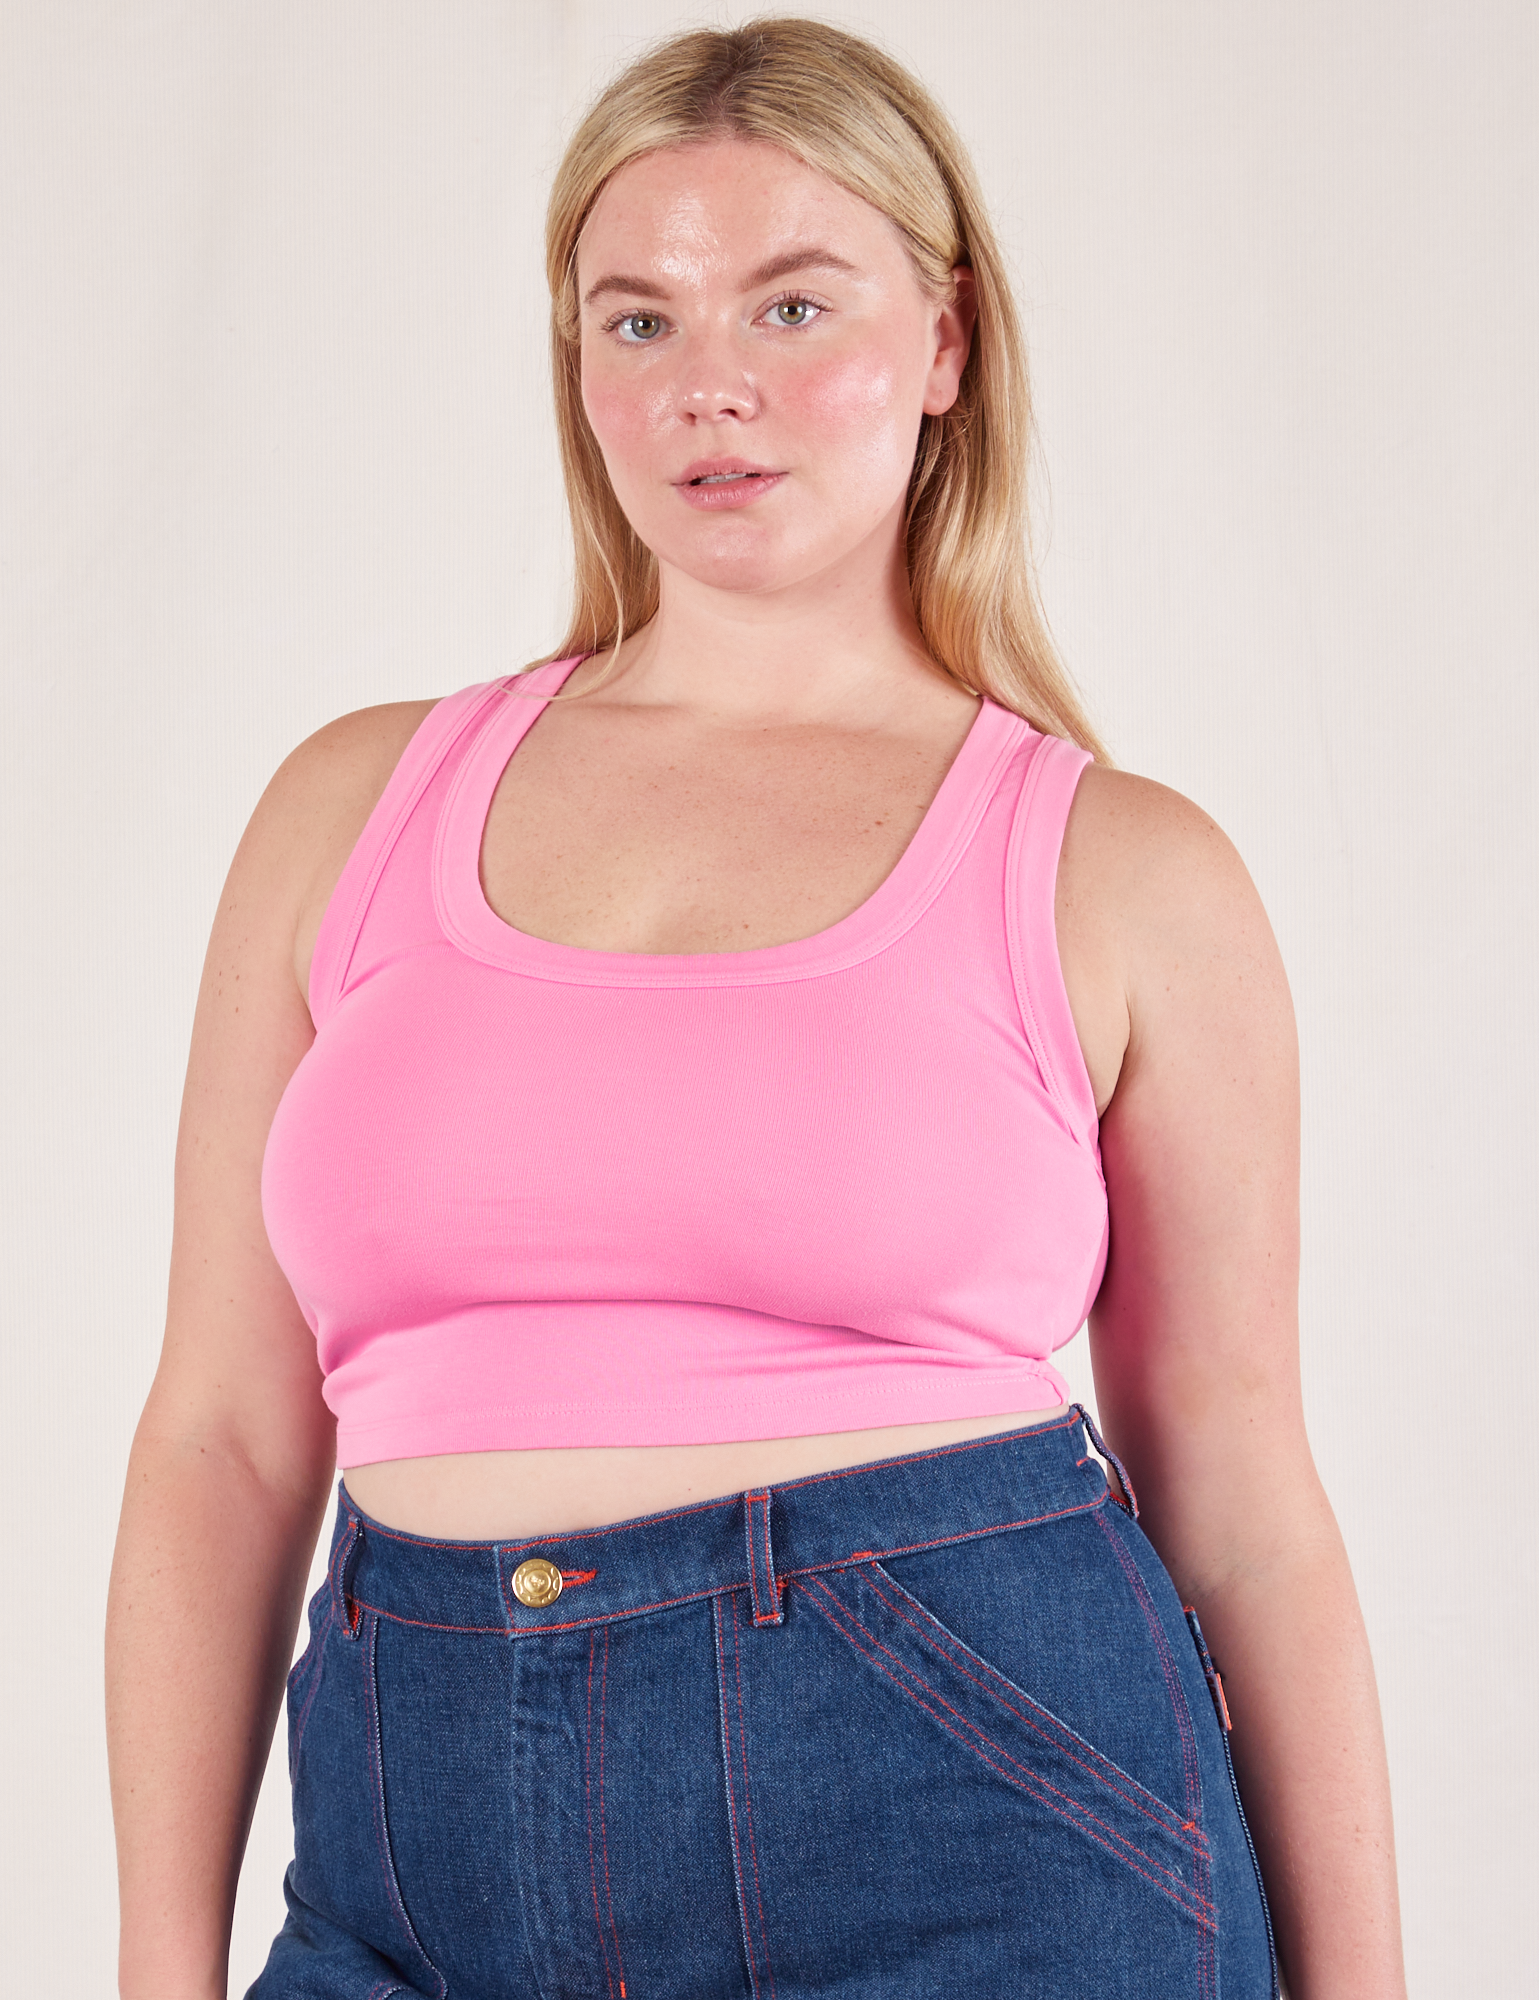 Lish is 5'8" and wearing S Cropped Tank Top in Bubblegum Pink